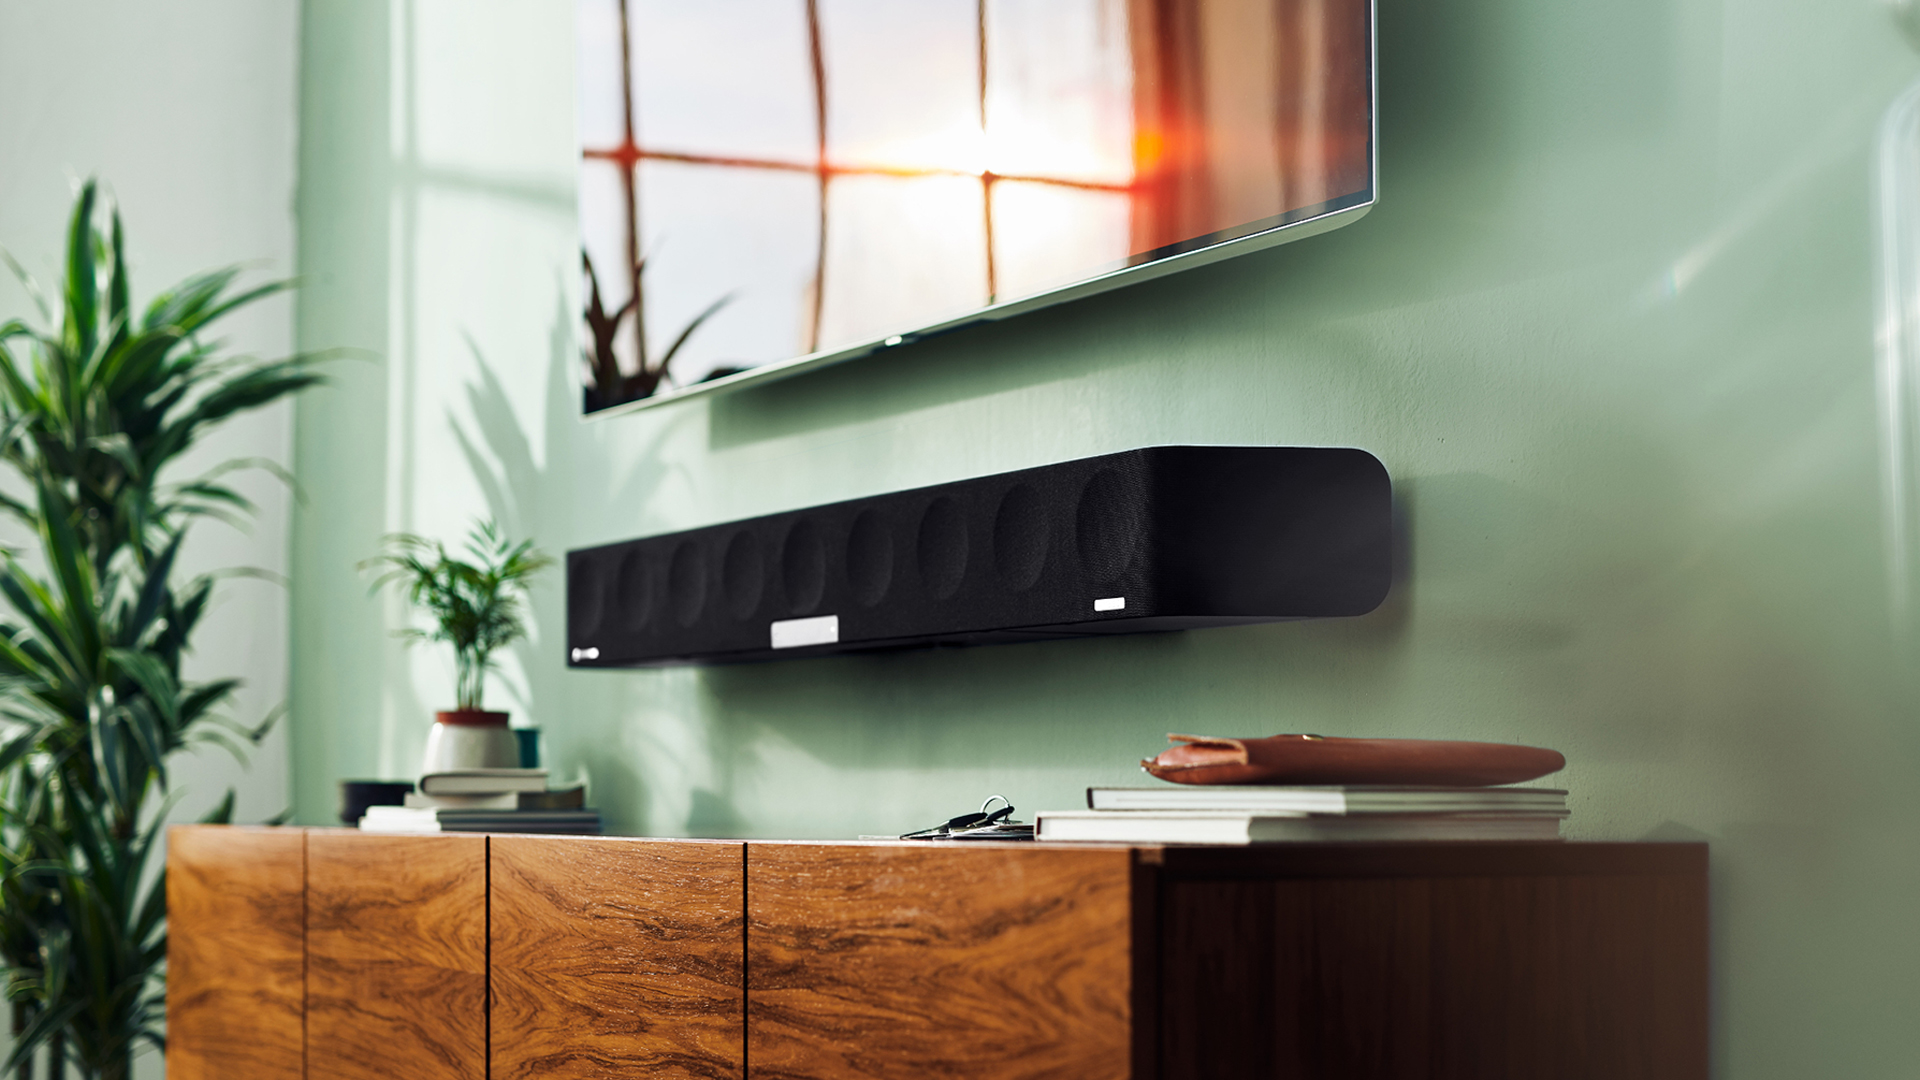 Pictured is the Sennheiser Ambeo soundbar mounted to a wall